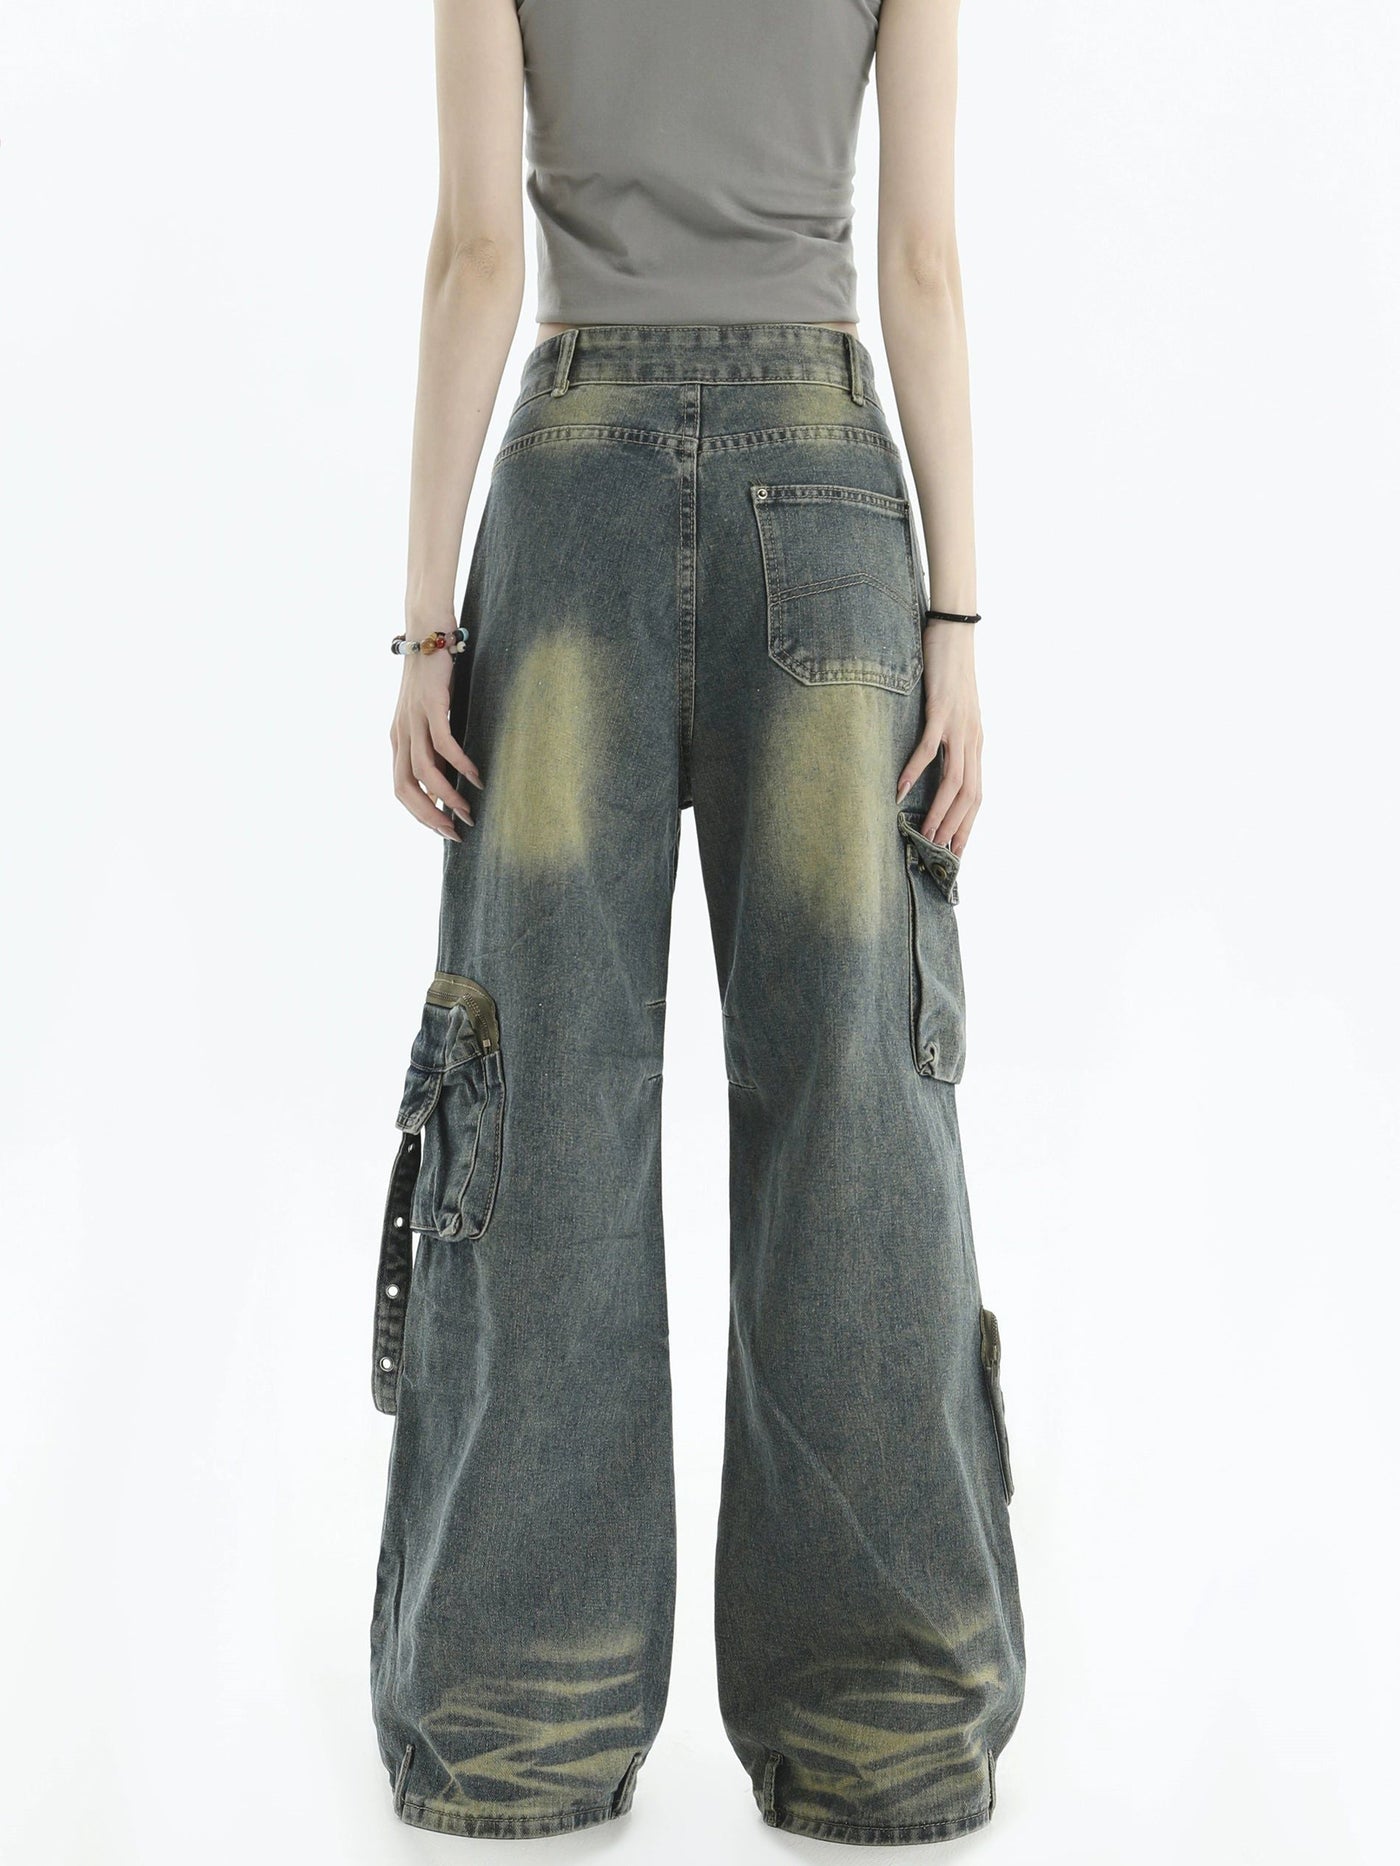 Fade Spots Cargo Jeans Korean Street Fashion Jeans By INS Korea Shop Online at OH Vault